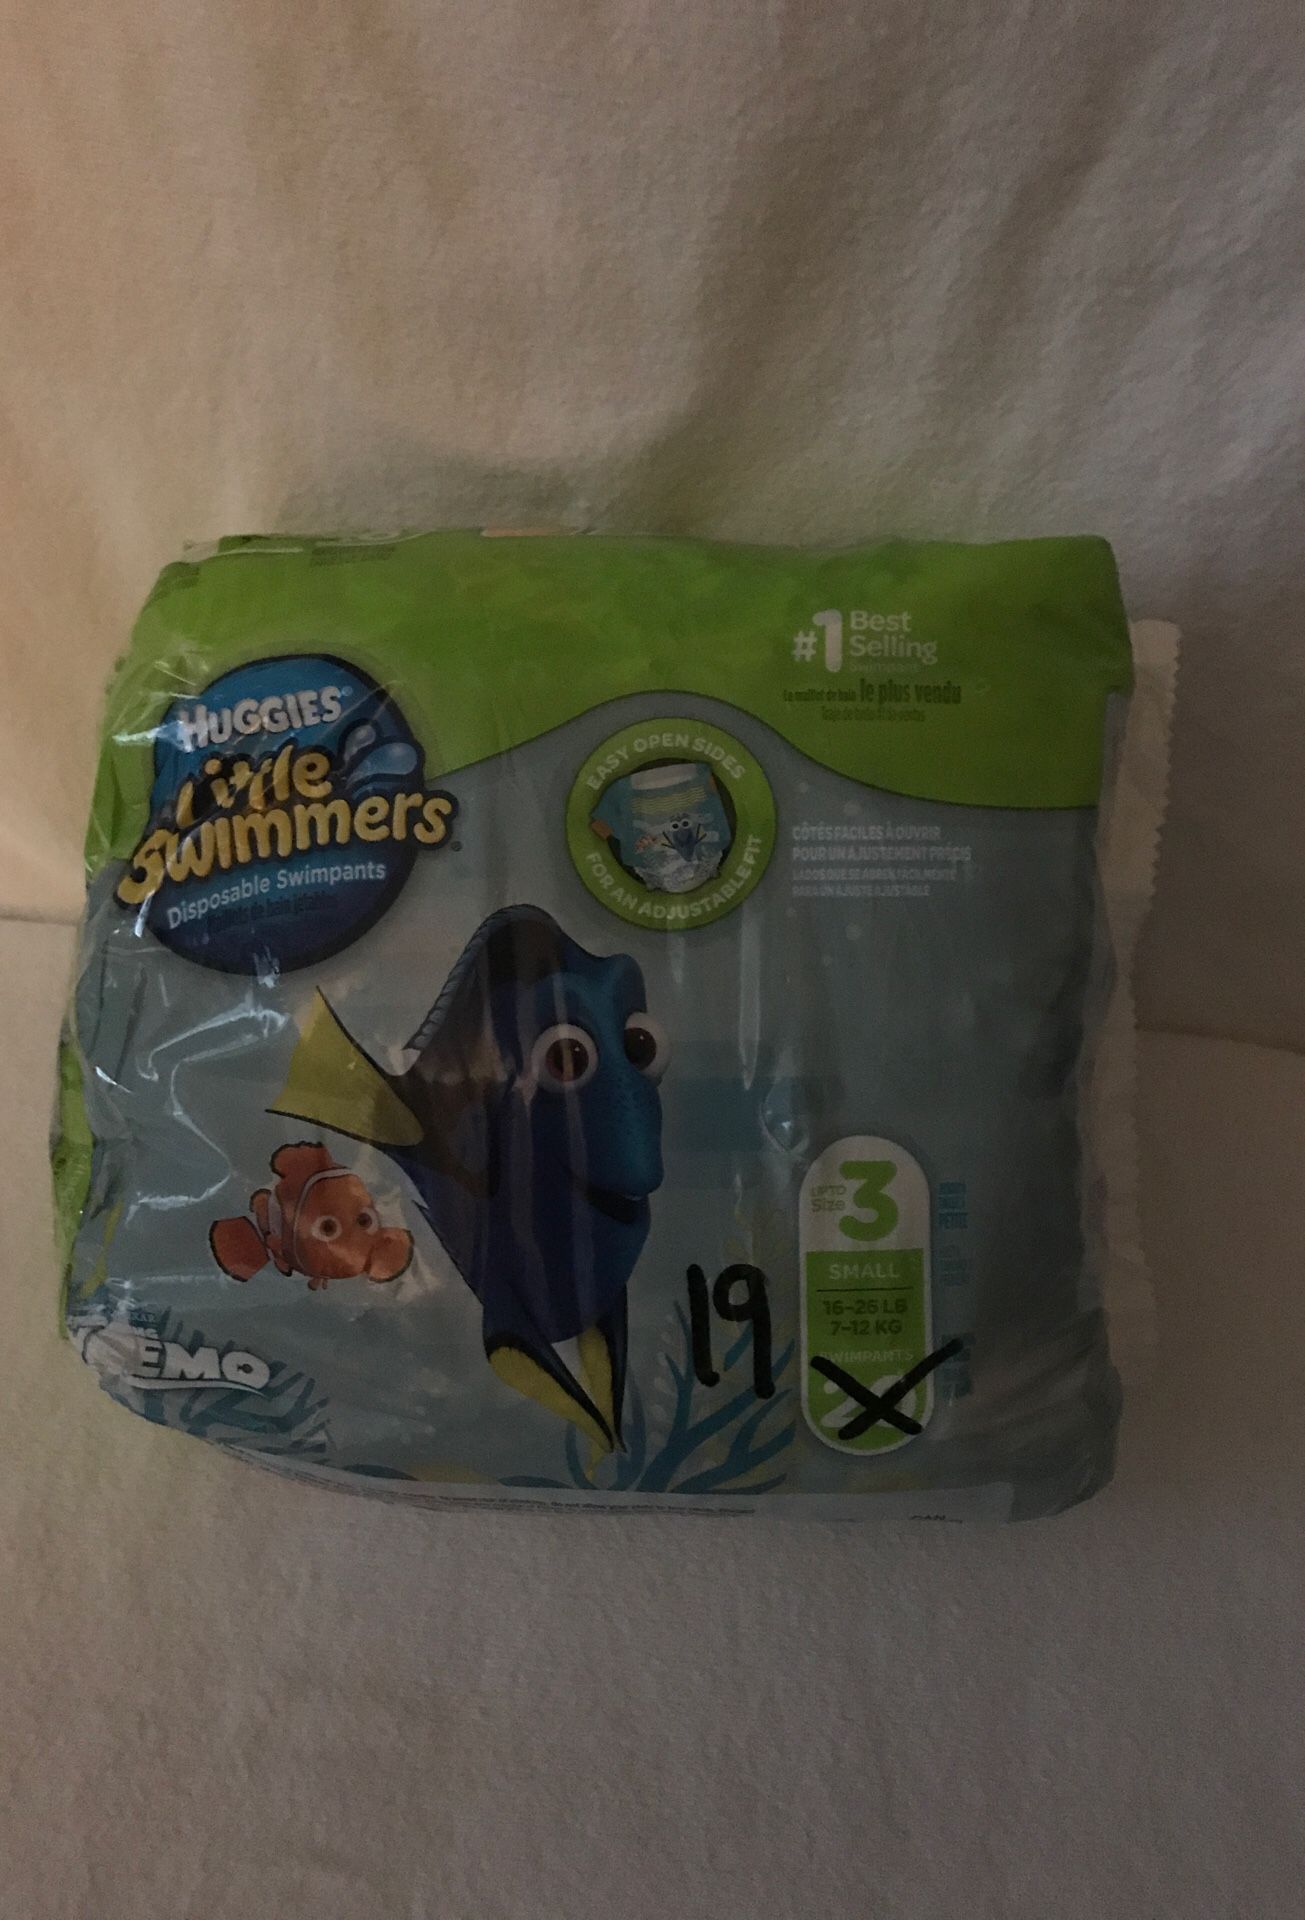 Huggies Little Swimmers Size 3, Count19.